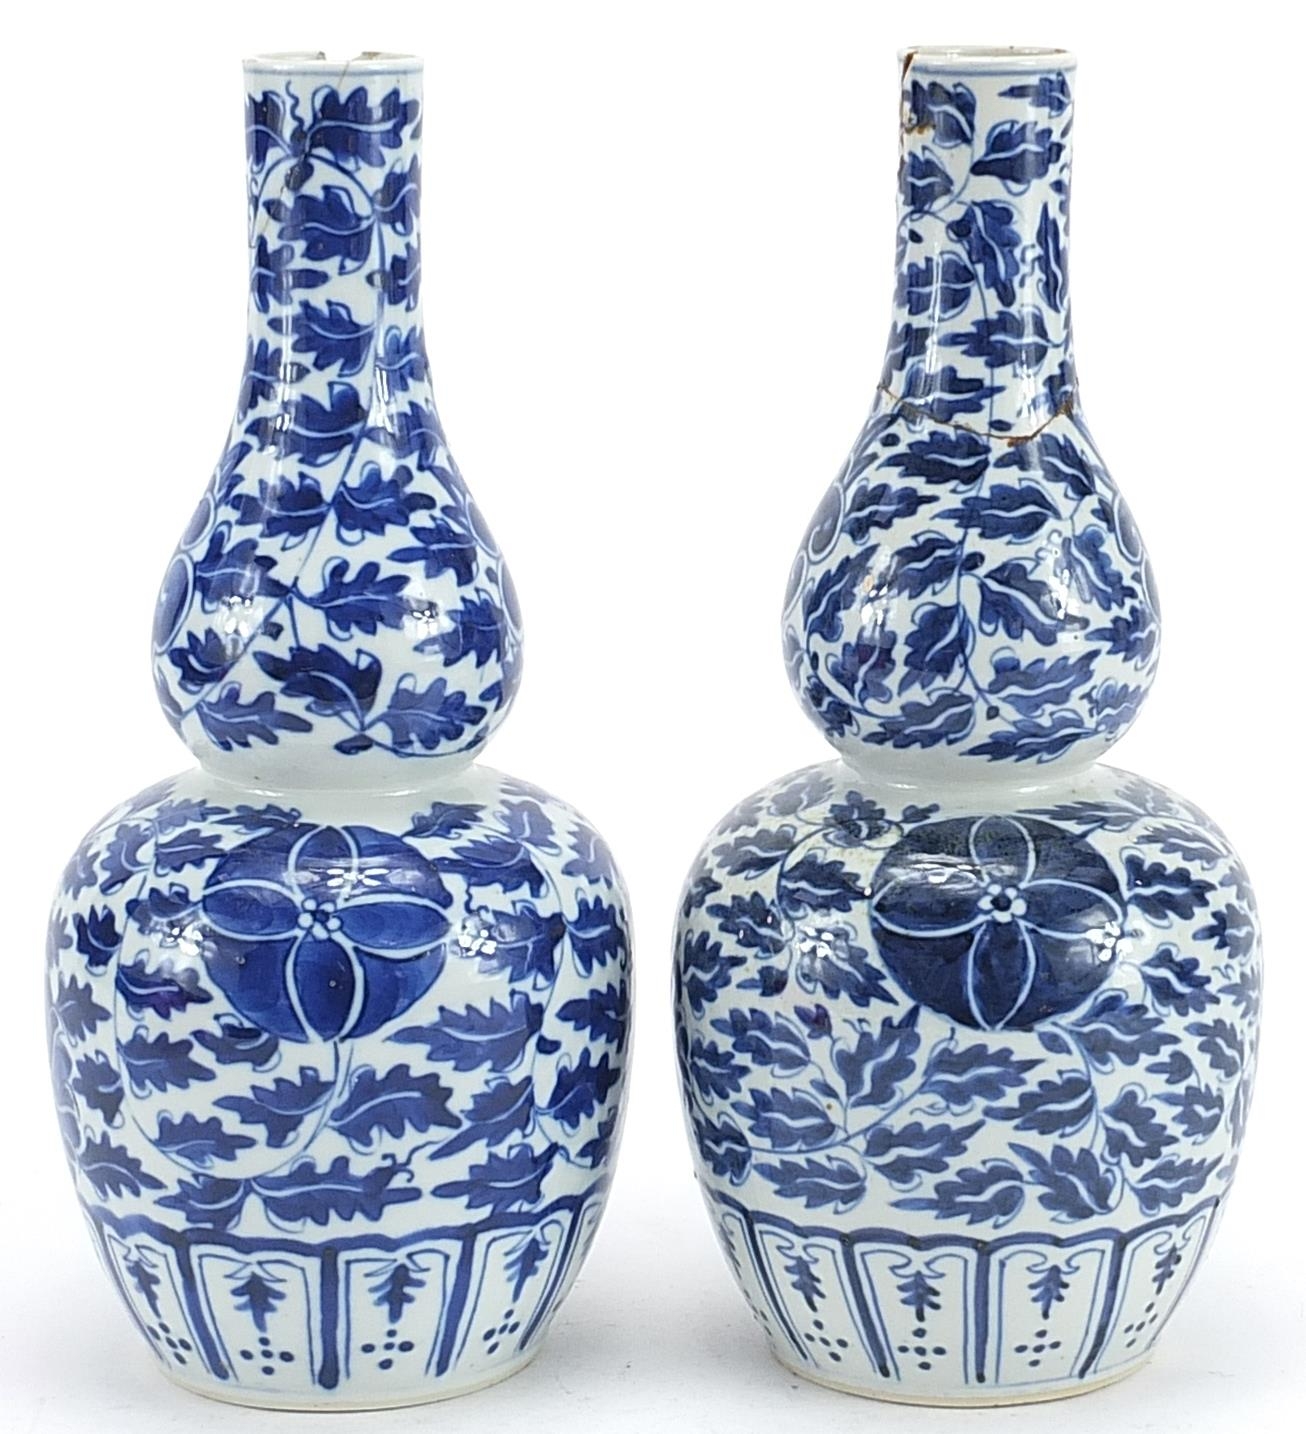 Pair of Chinese blue and white porcelain vases hand painted with flowers, four figure character